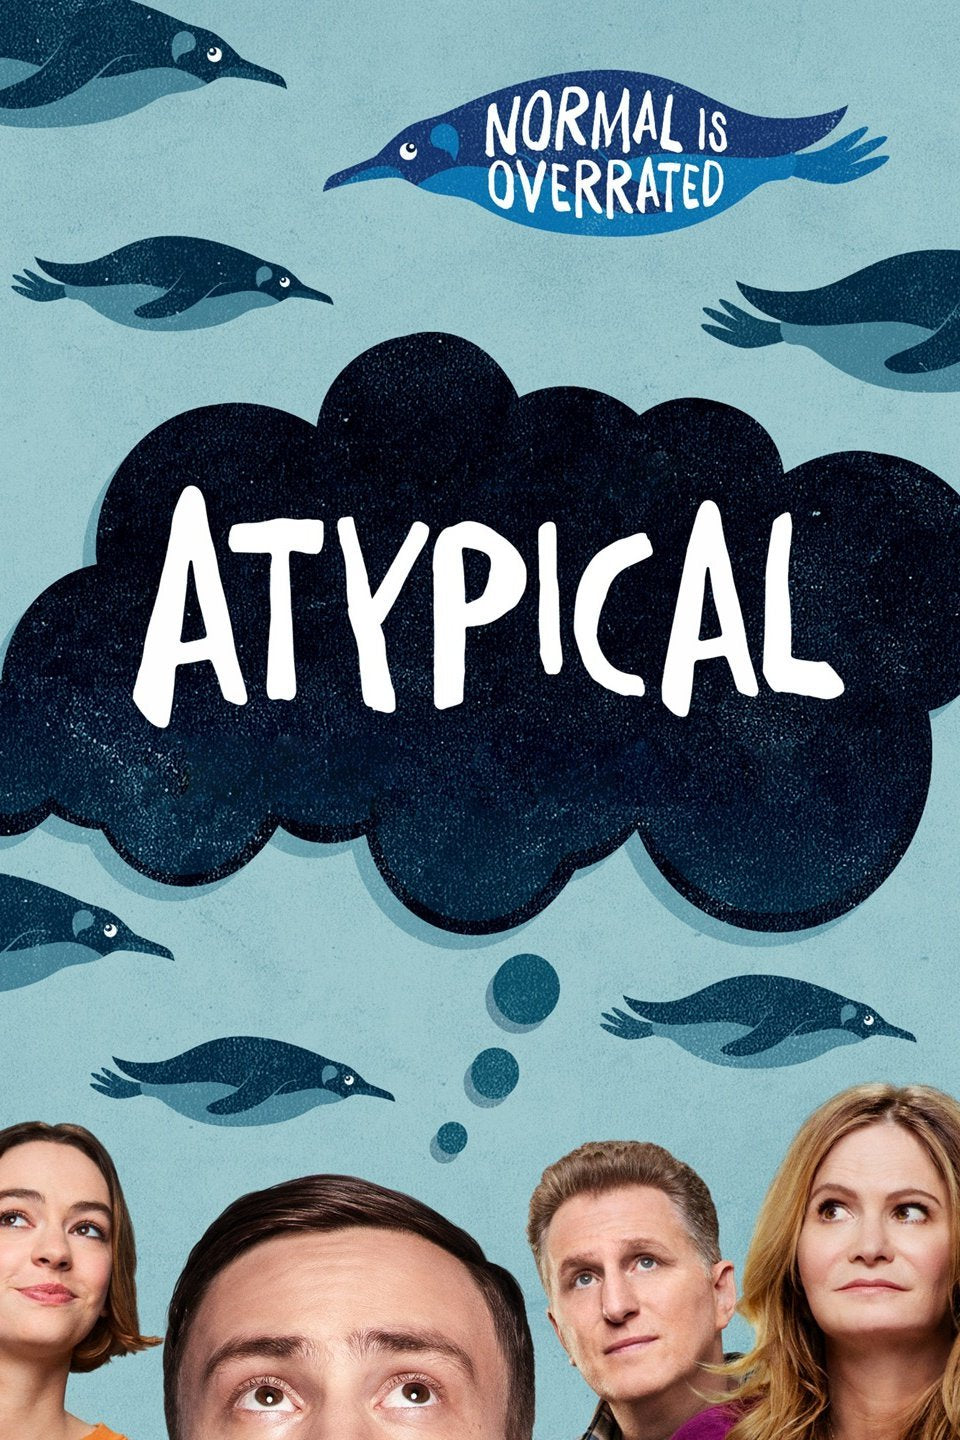 Atypical, An underrated TV show that deserves Recognition.  #CraxyReviews